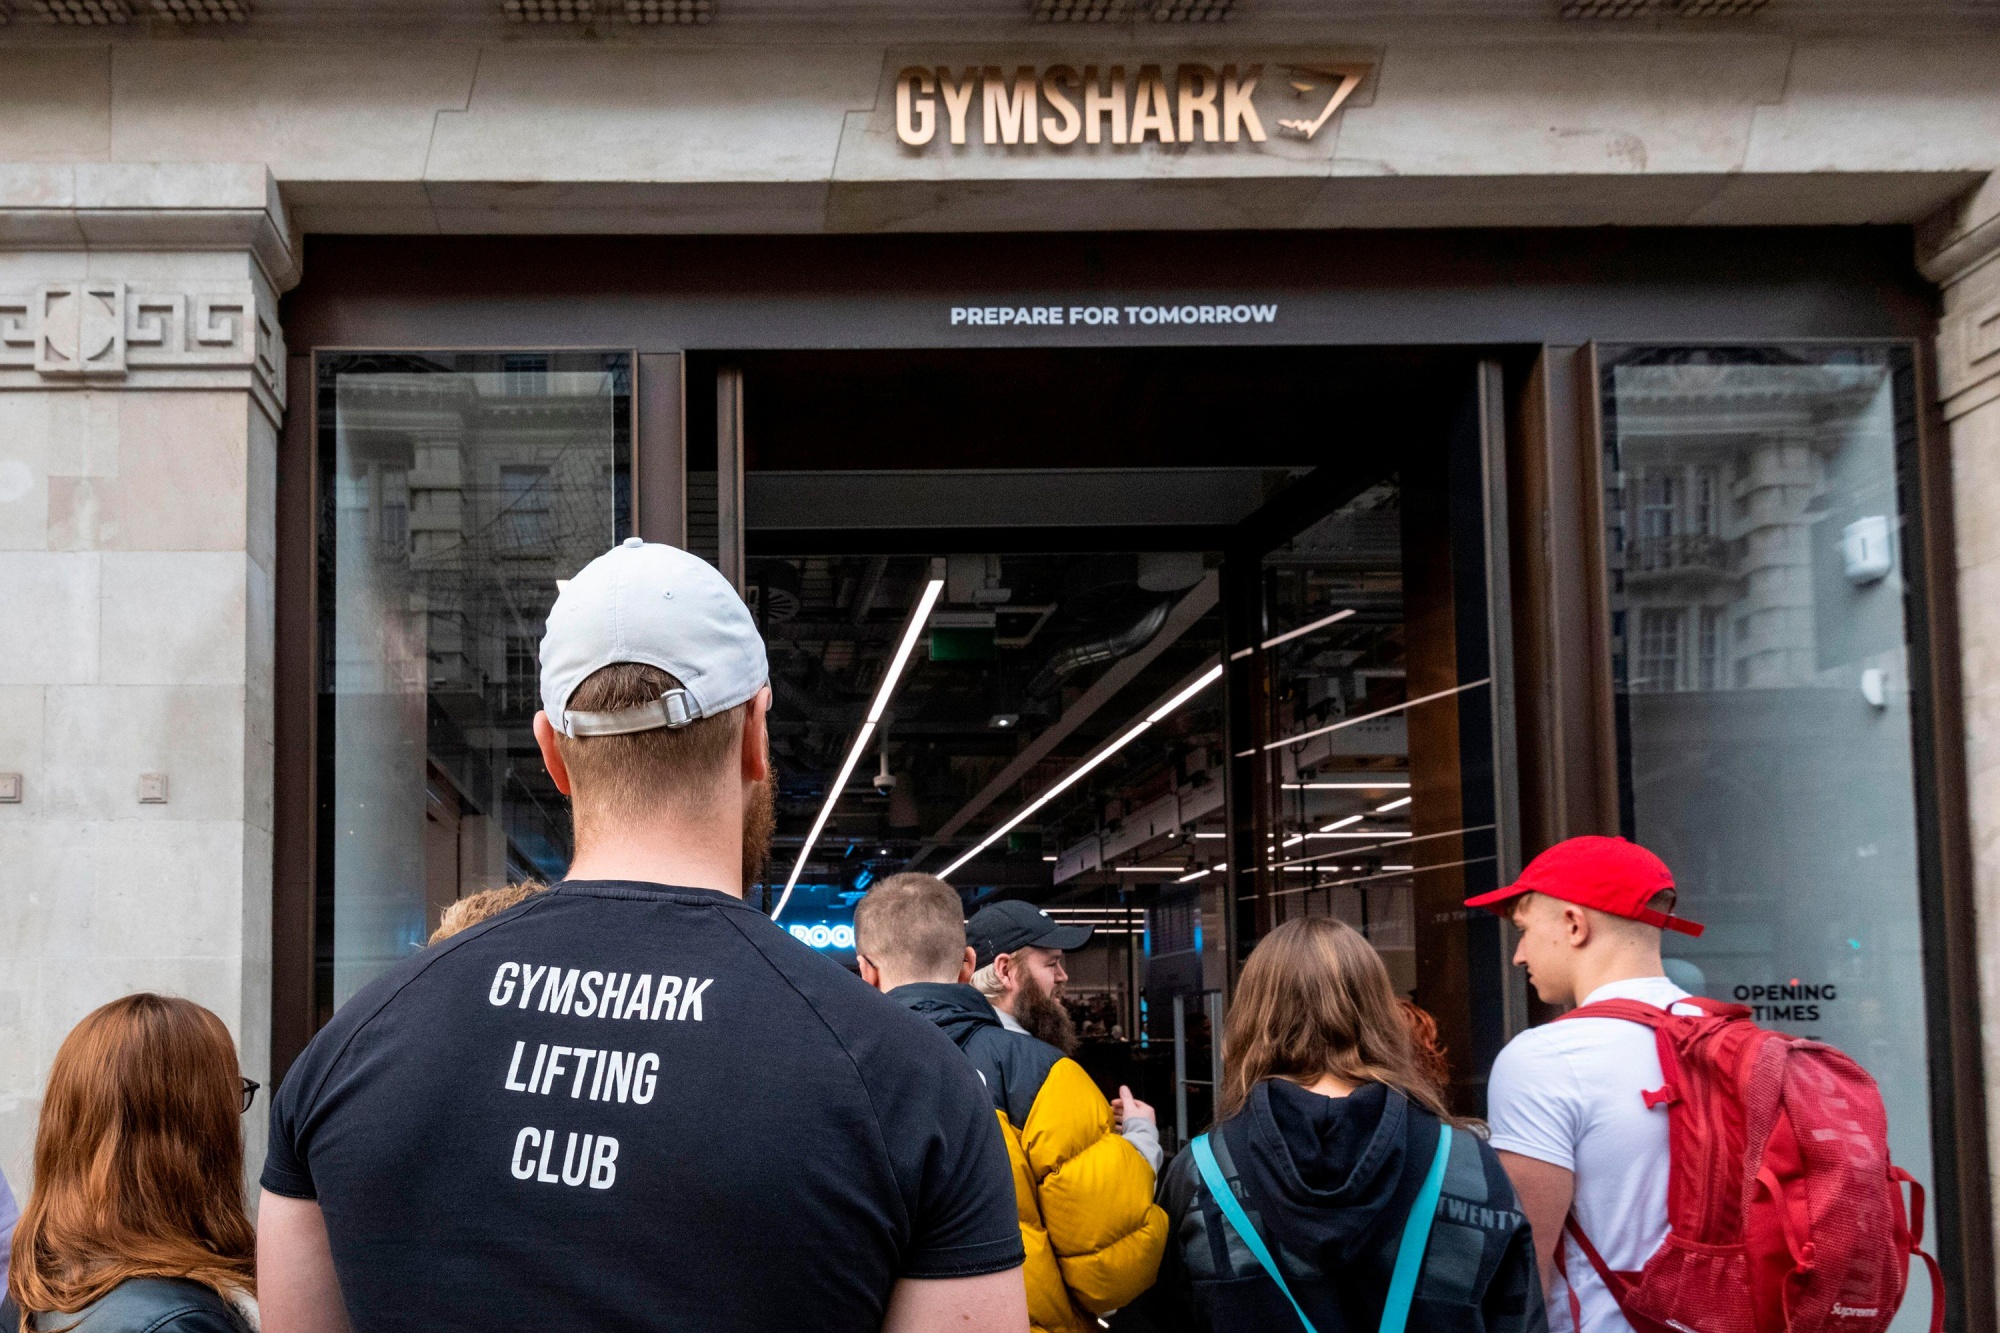 Who is Gymshark founder Ben Francis and what is his net worth